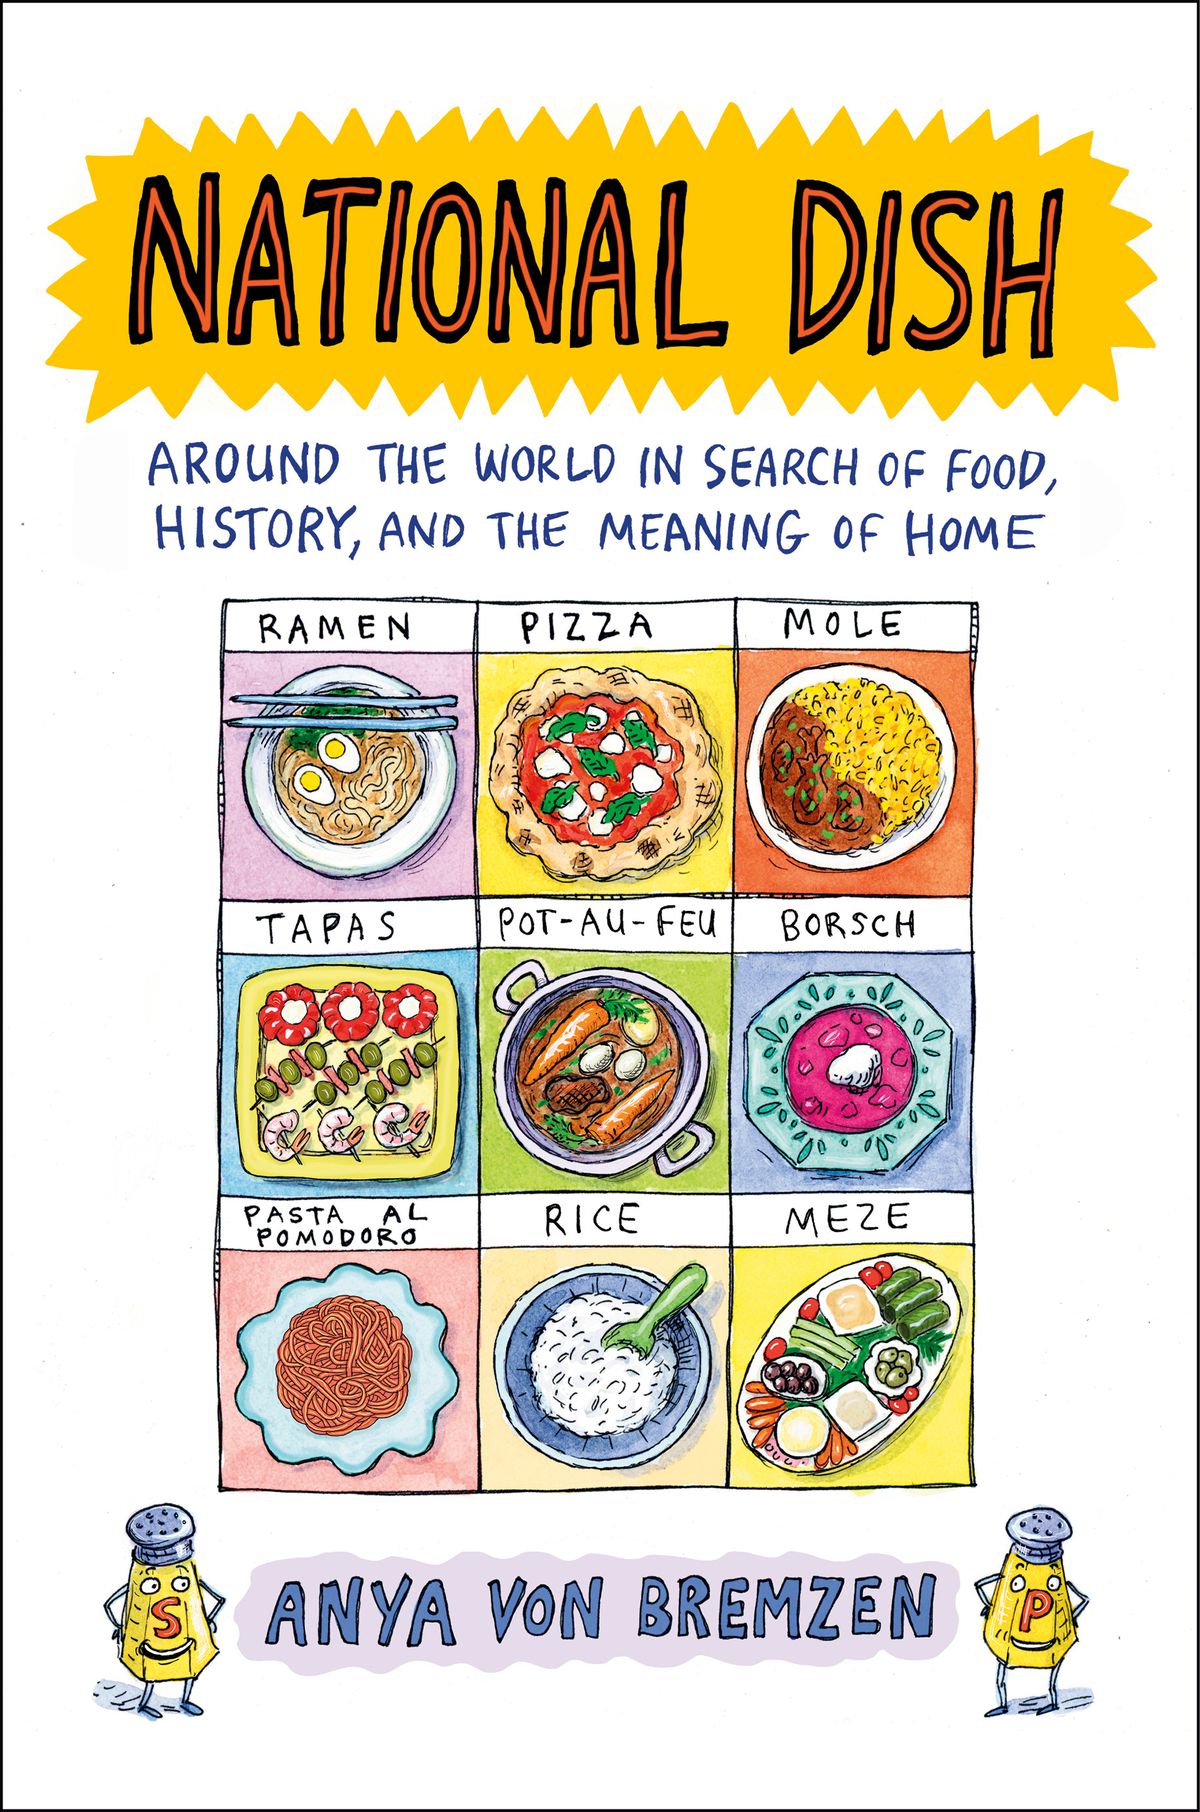 The book cover of NATIONAL DISH featuring an illustrated grid depicting the national dishes of various locations, including ramen, pizza, mole, 